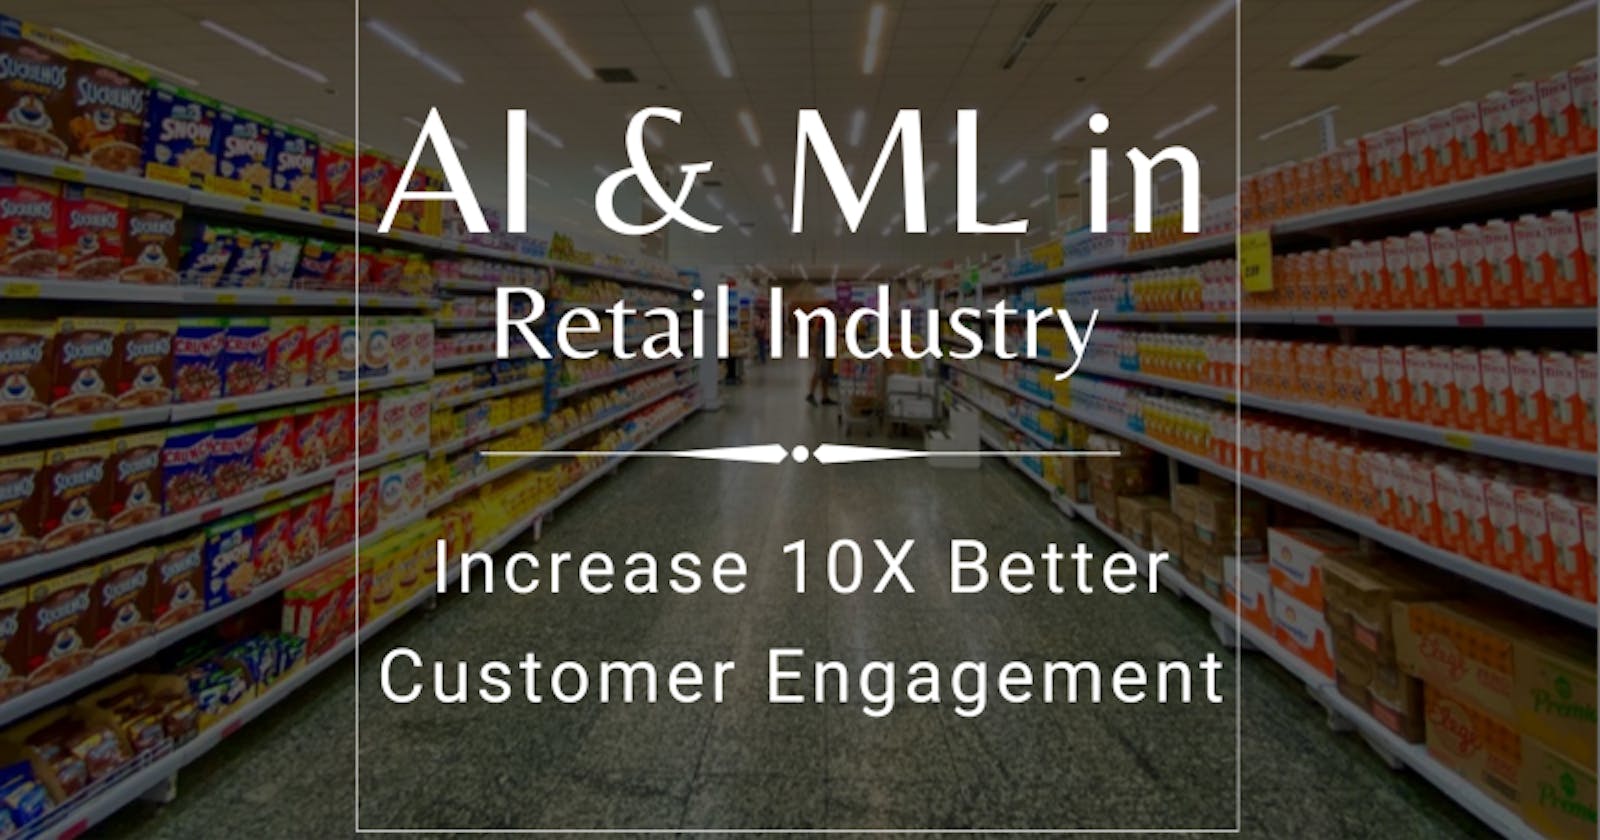 Drive 10X Better Customer Engagement by Using AI and ML in Retail Industry 🛍